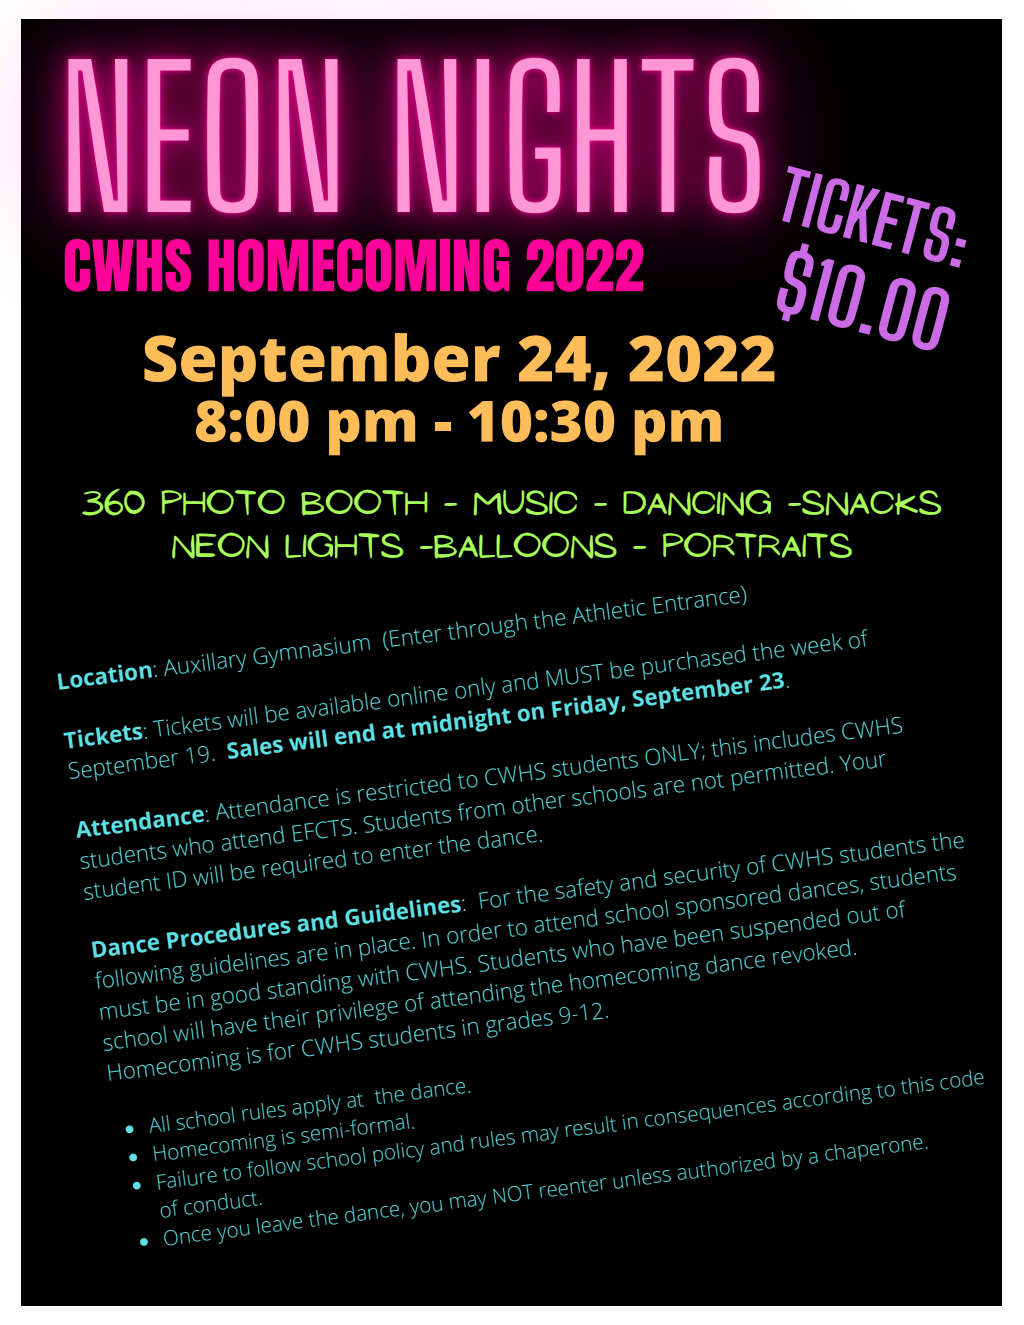 payschools-events-canal-winchester-high-school-homecoming-2022-neon